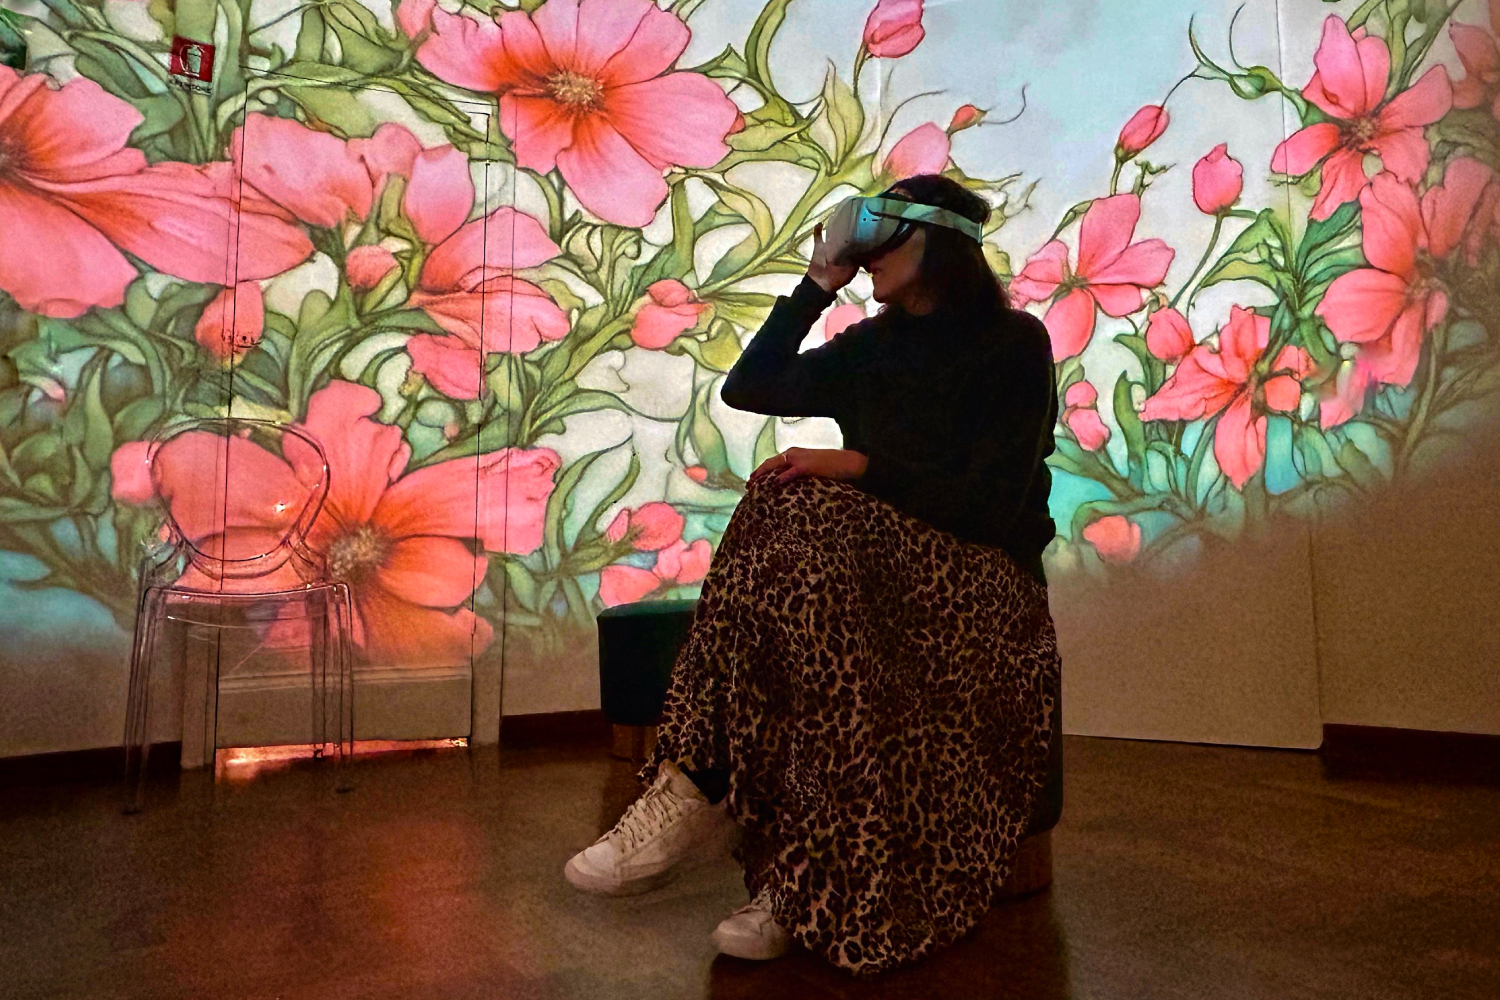 Girl using the VR headset into an immersive room depicting images in Art Nouveau style